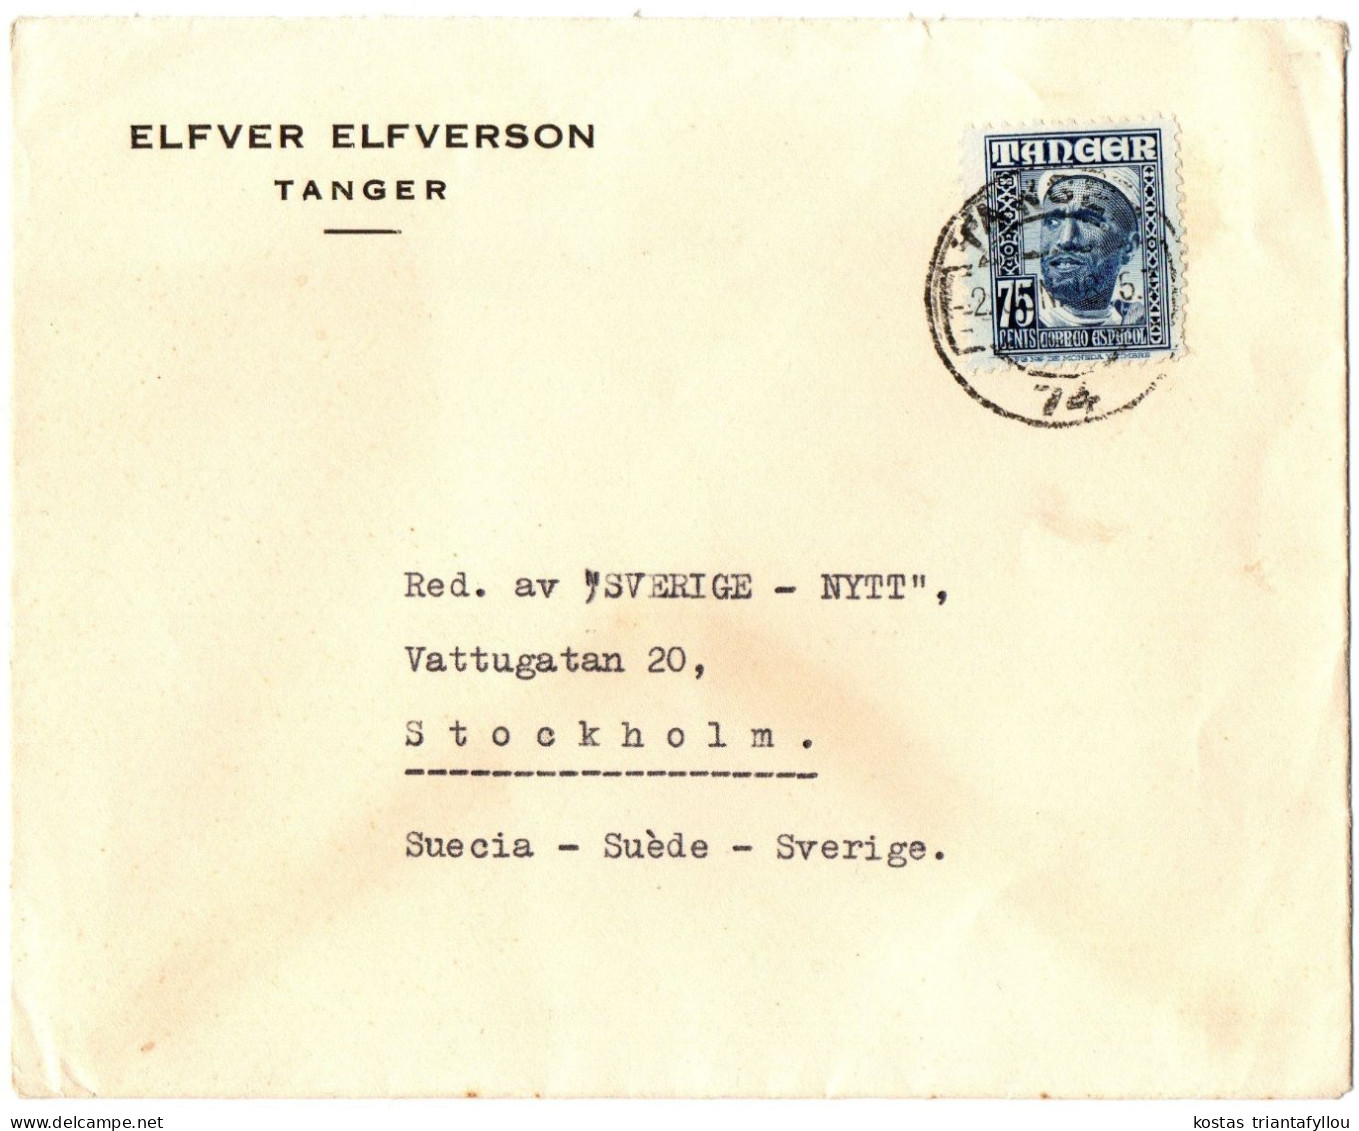 1,56 MOROCCO, TANGER, 1948, COVER TO SWEDEN - Spanish Morocco